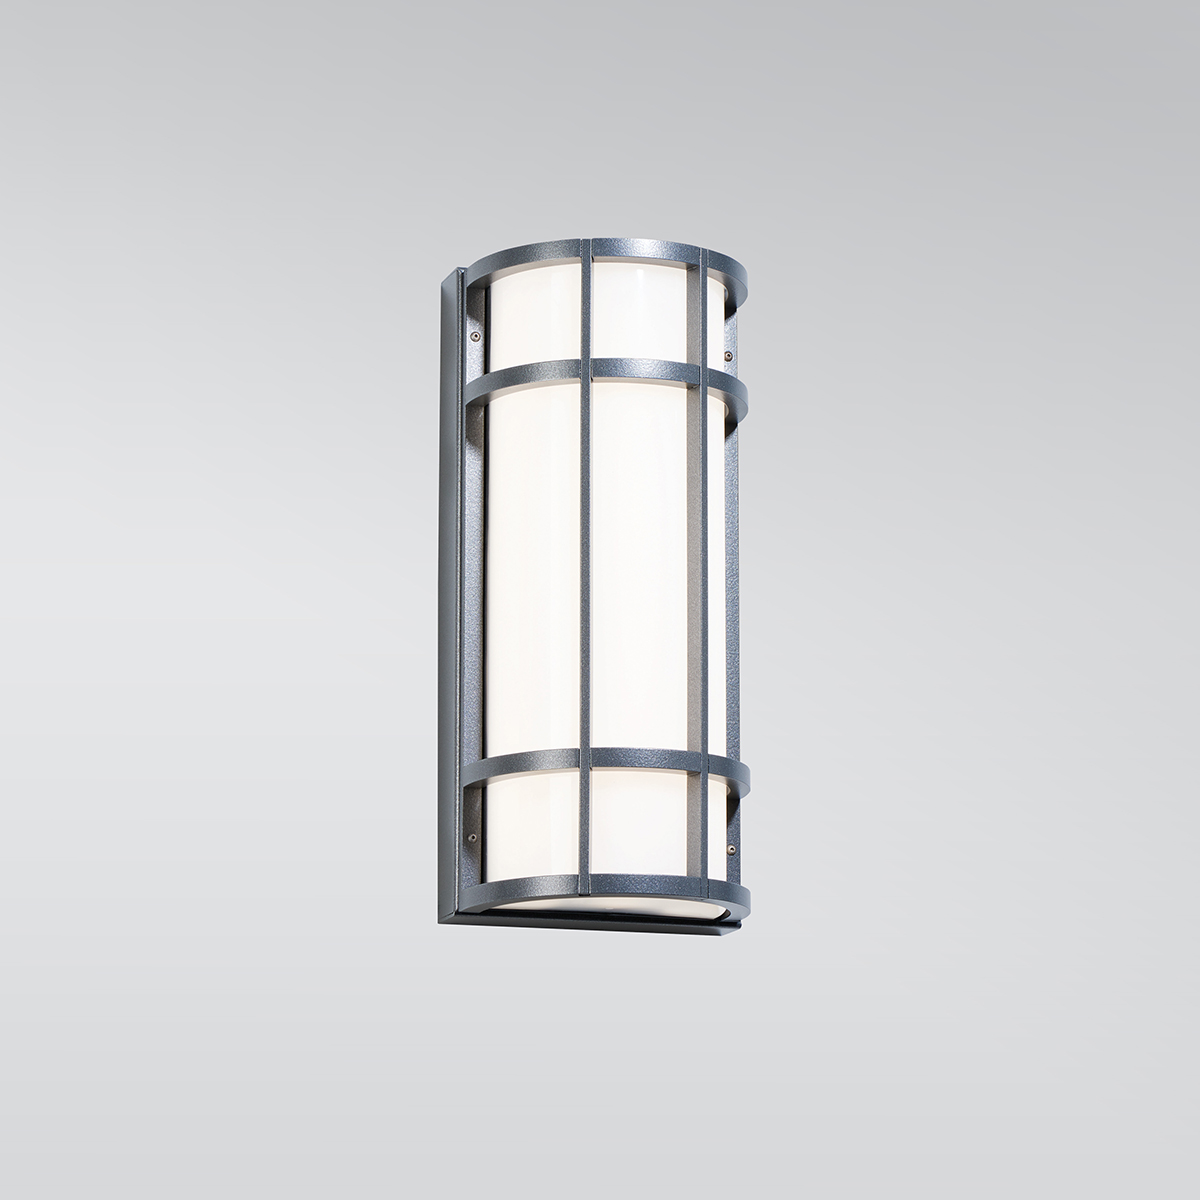 A rectangular outdoor wall sconce with cross bar accents